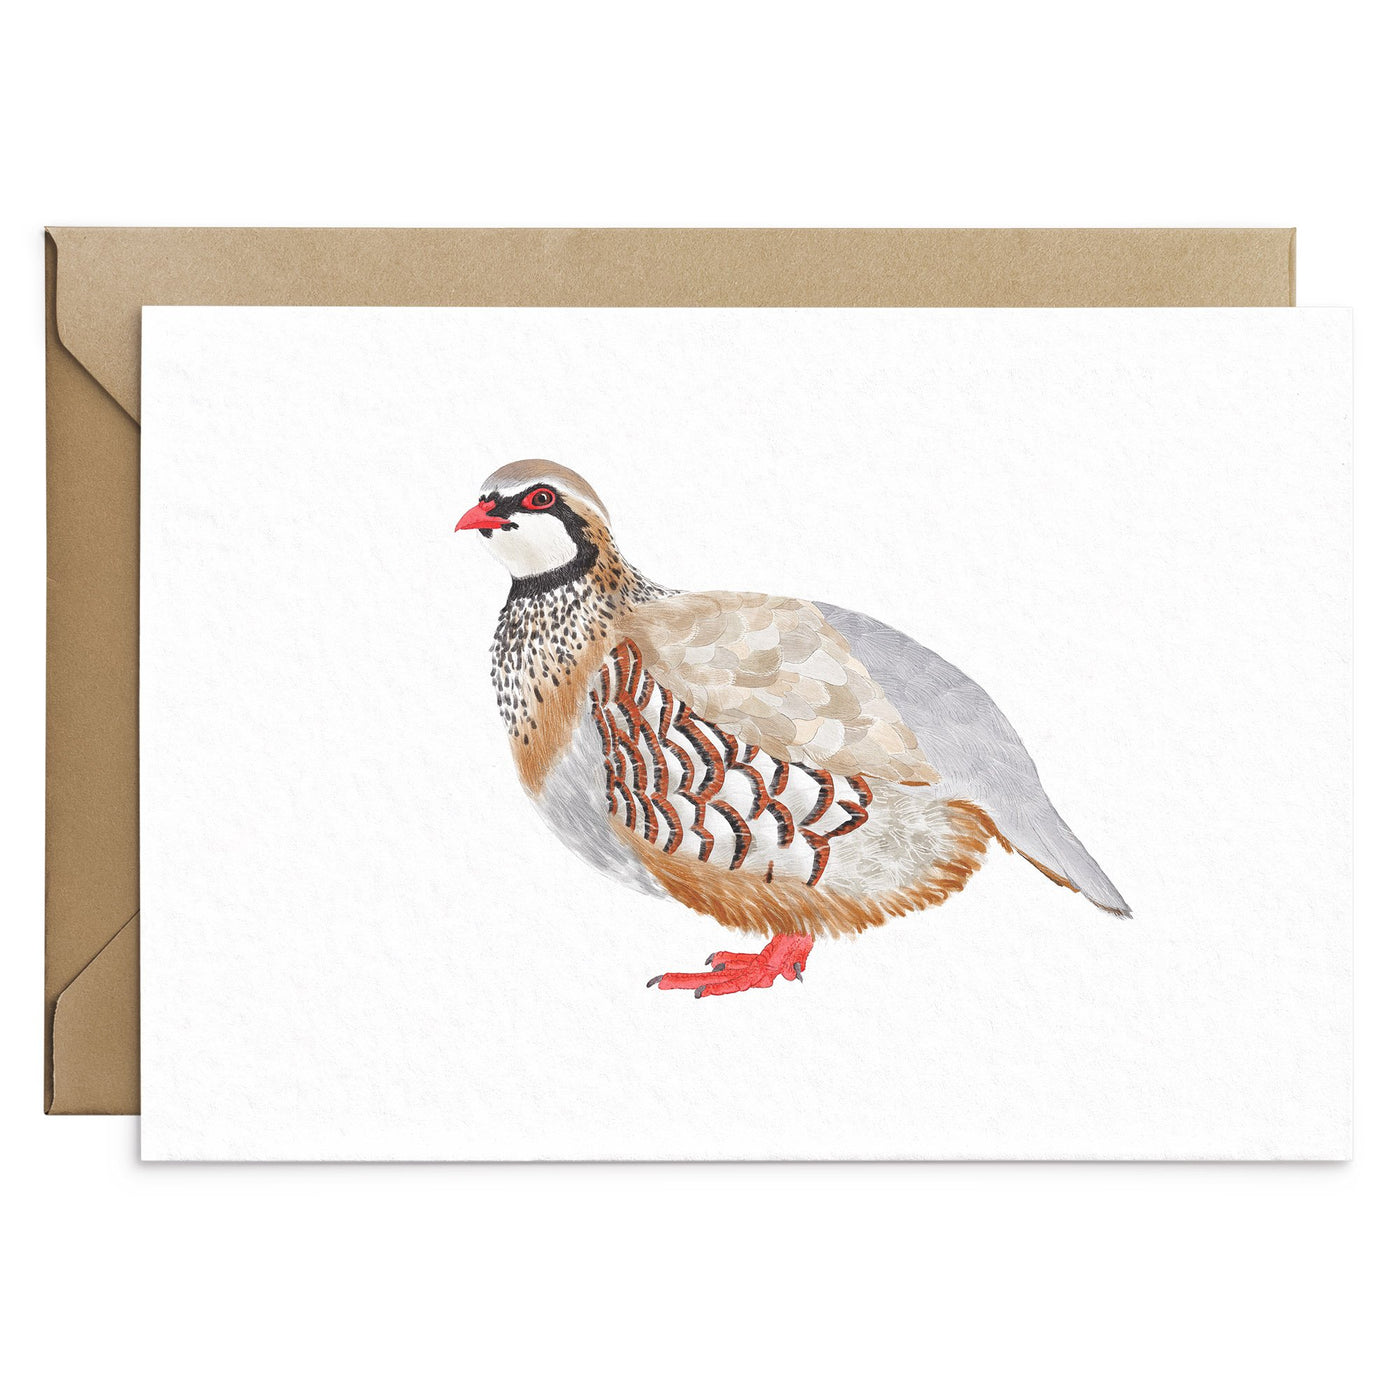 Partridge Card - Poppins & Co.